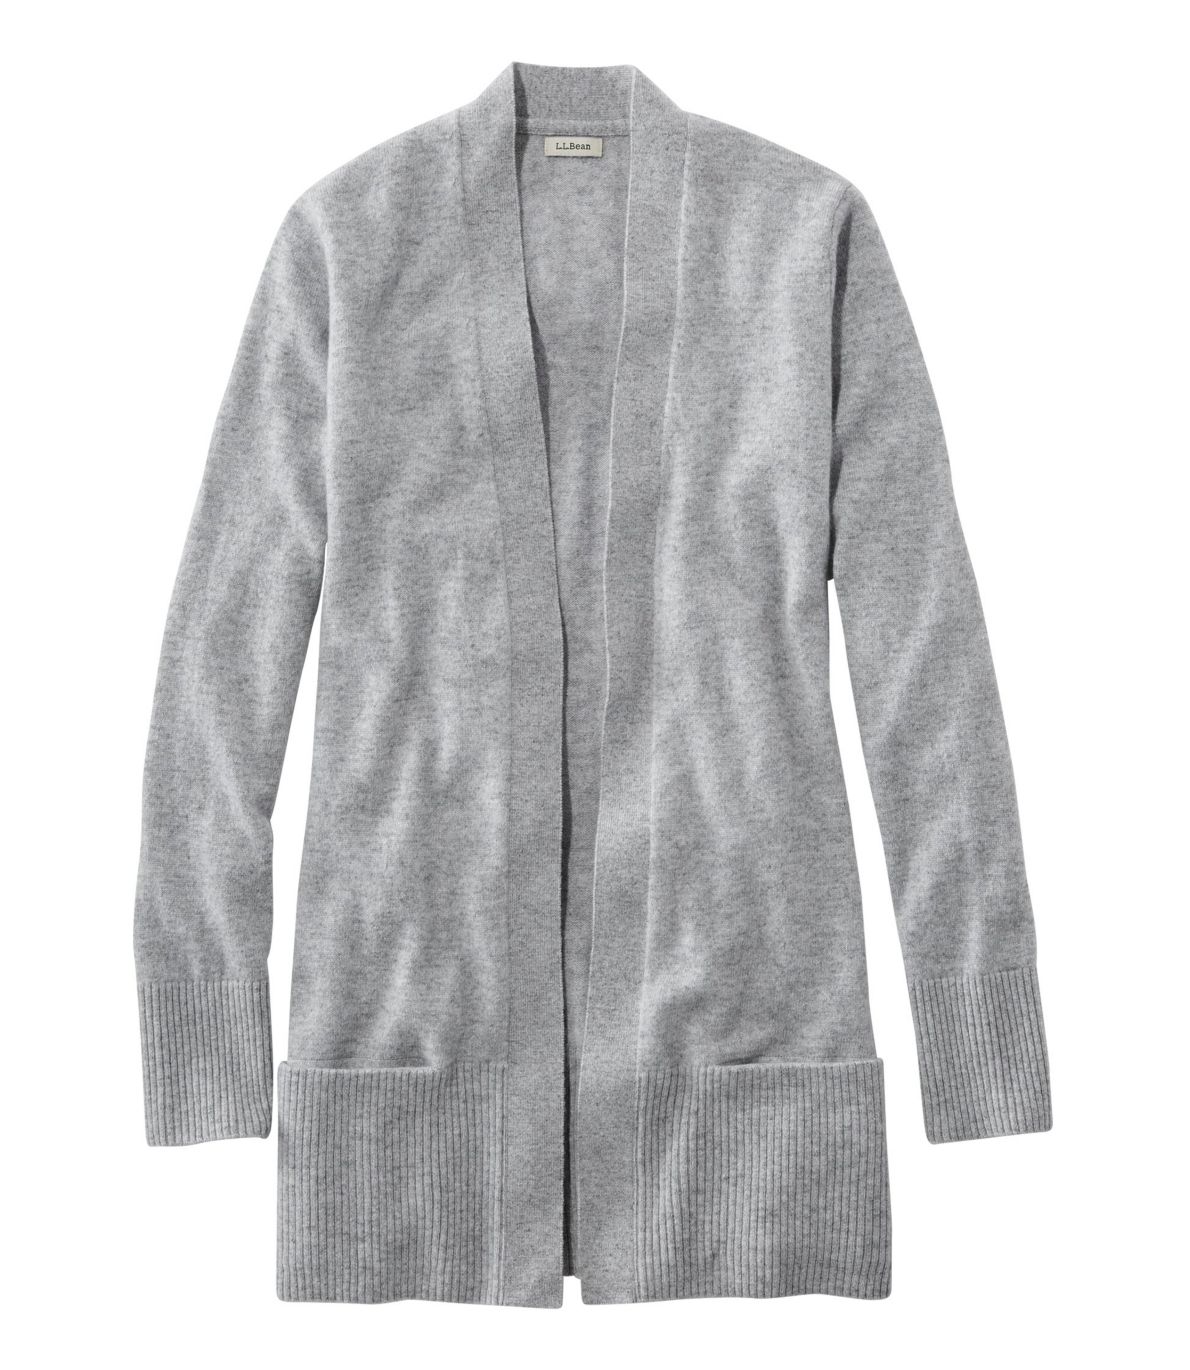 Women's Classic Cashmere Open Cardigan with Pocket